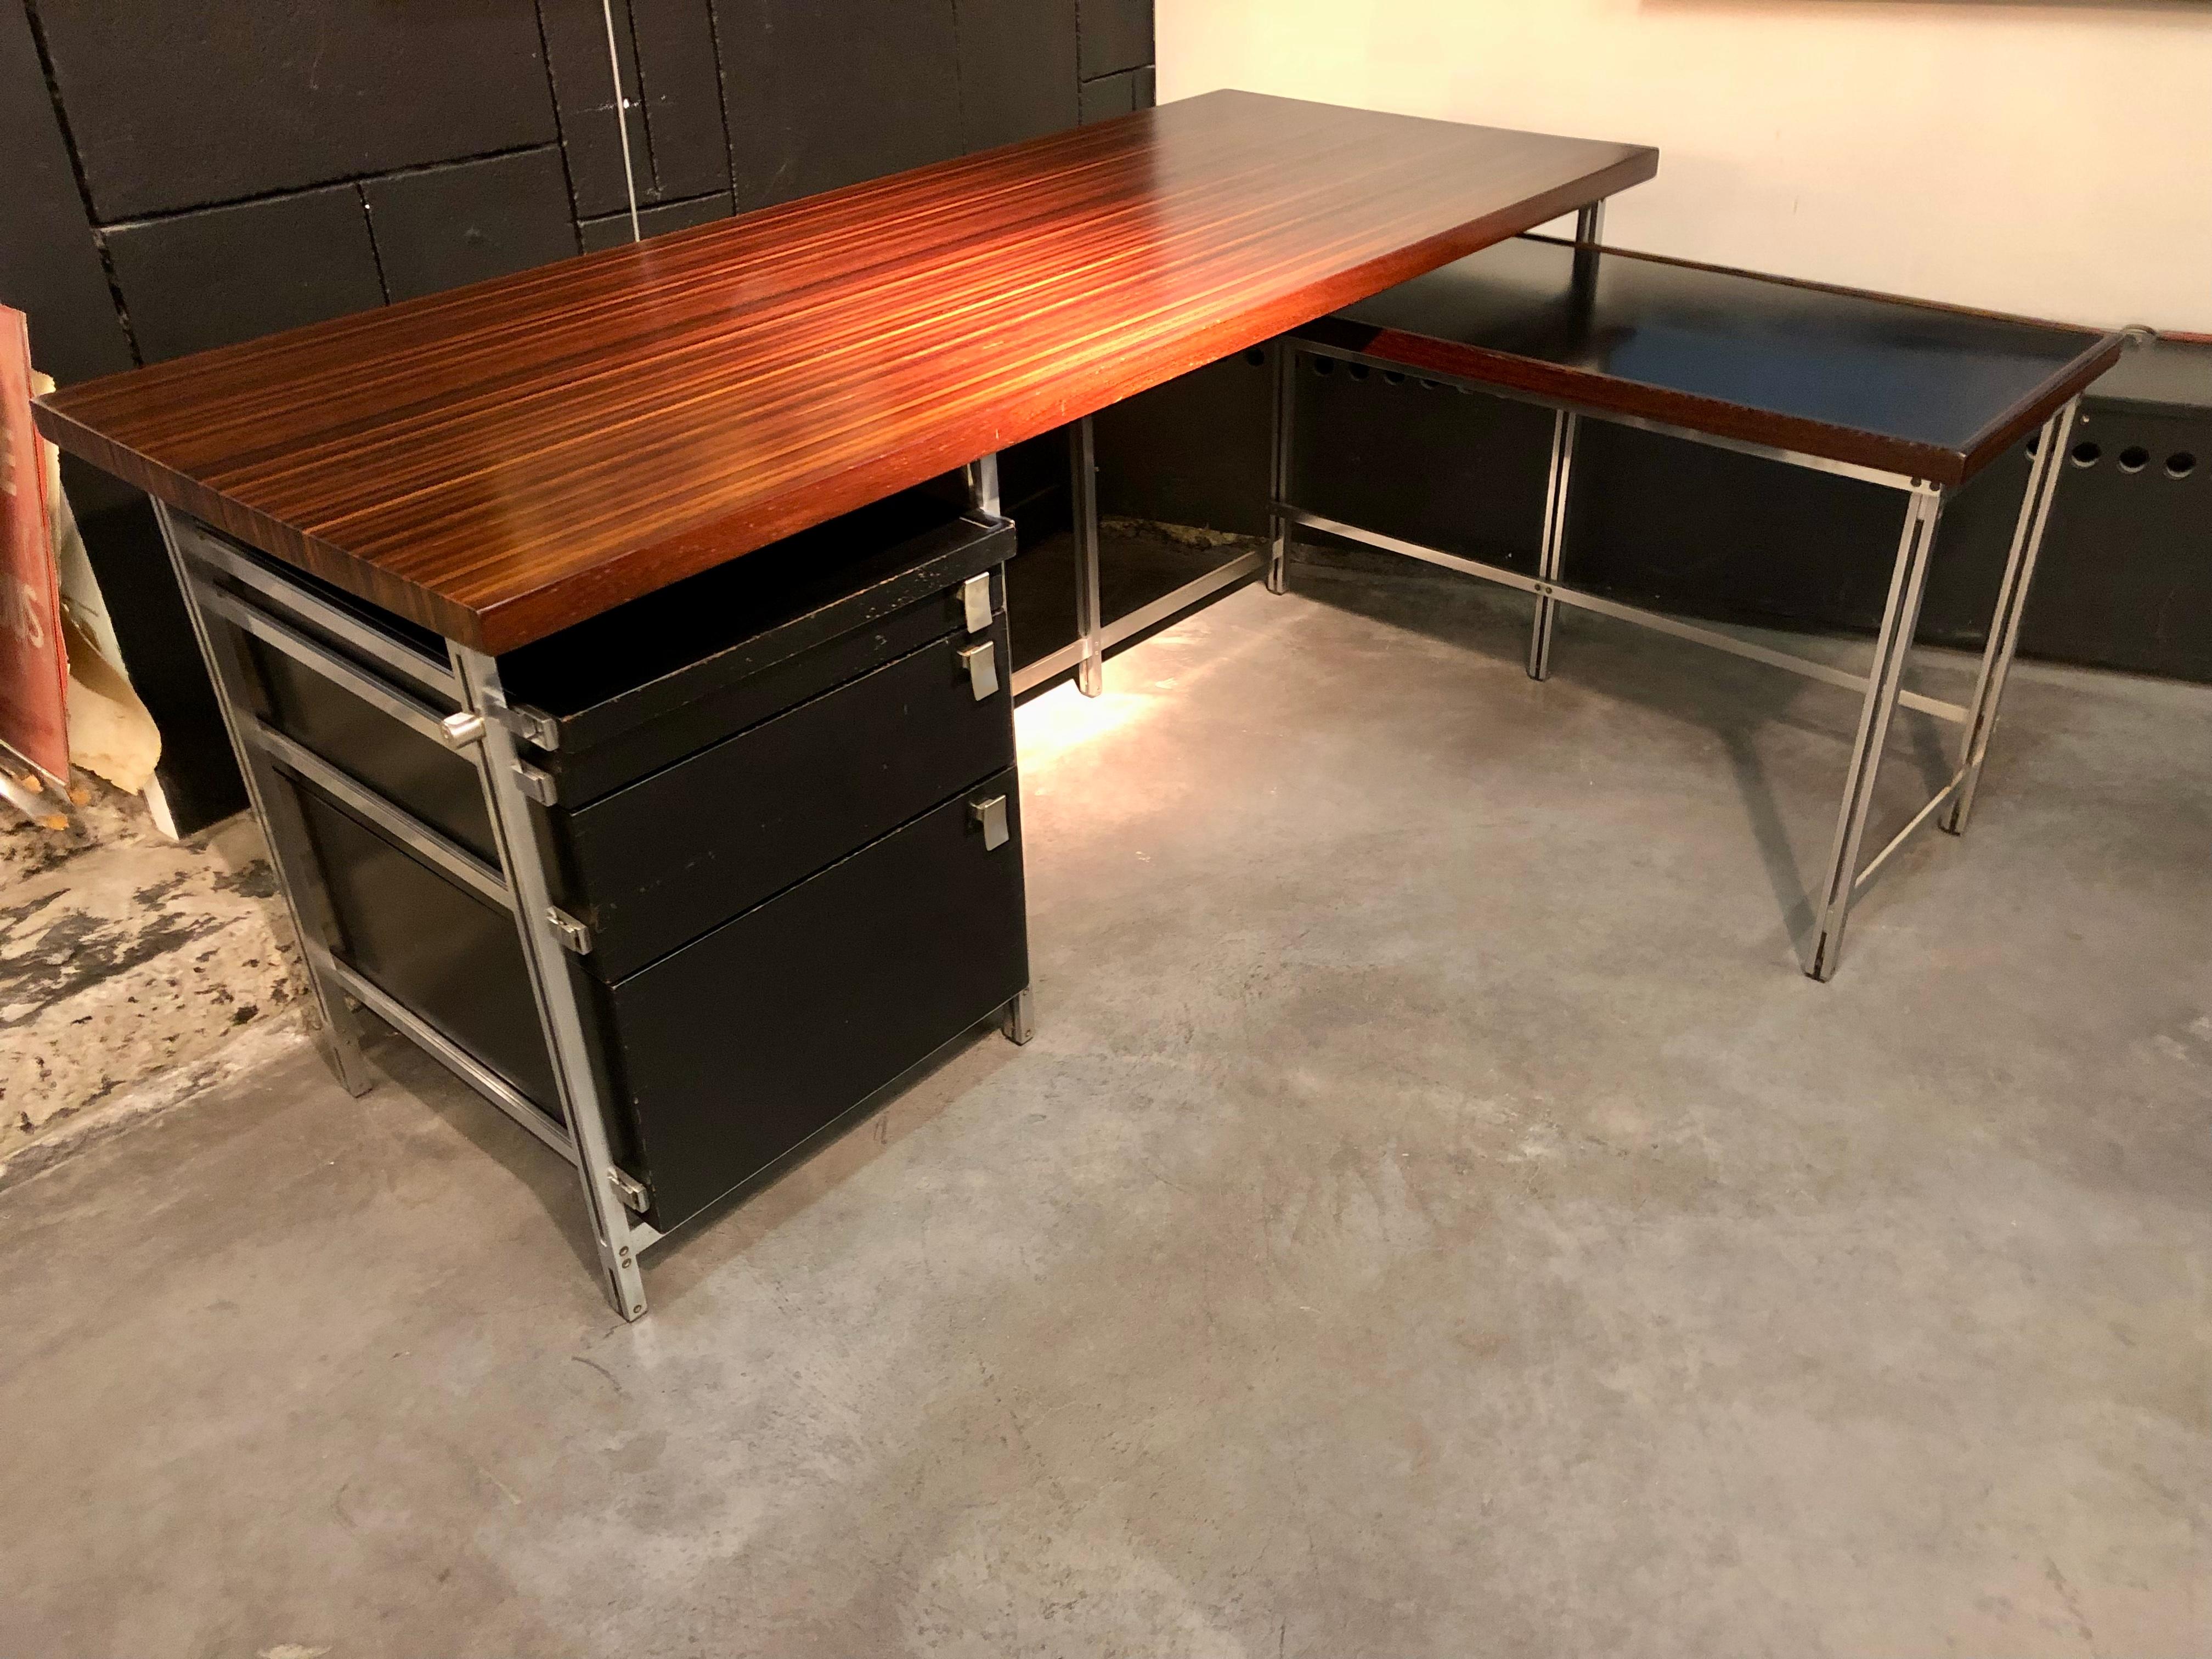 End-grain desk in wenge early production by mobilier universel in beginning of the sixties.
Very high standard of fabrication top in wenge and drawers in solid black lacquered wood and dovetails.